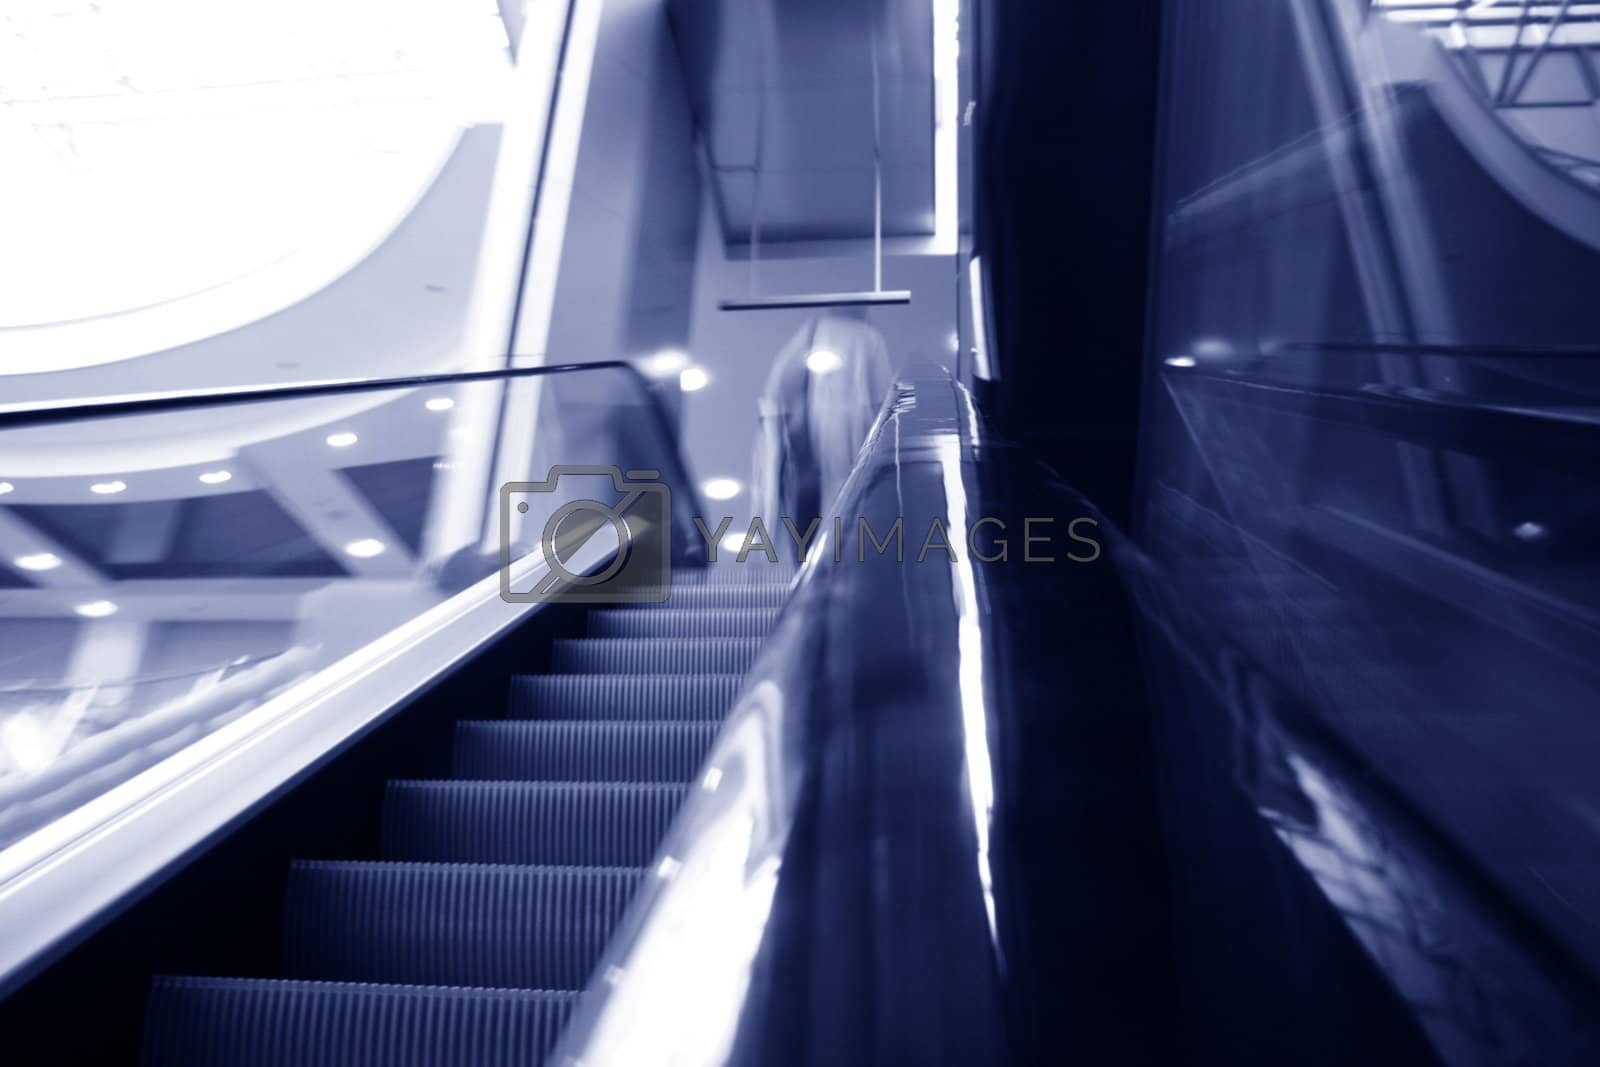 Royalty free image of blurred escalator by Yellowj